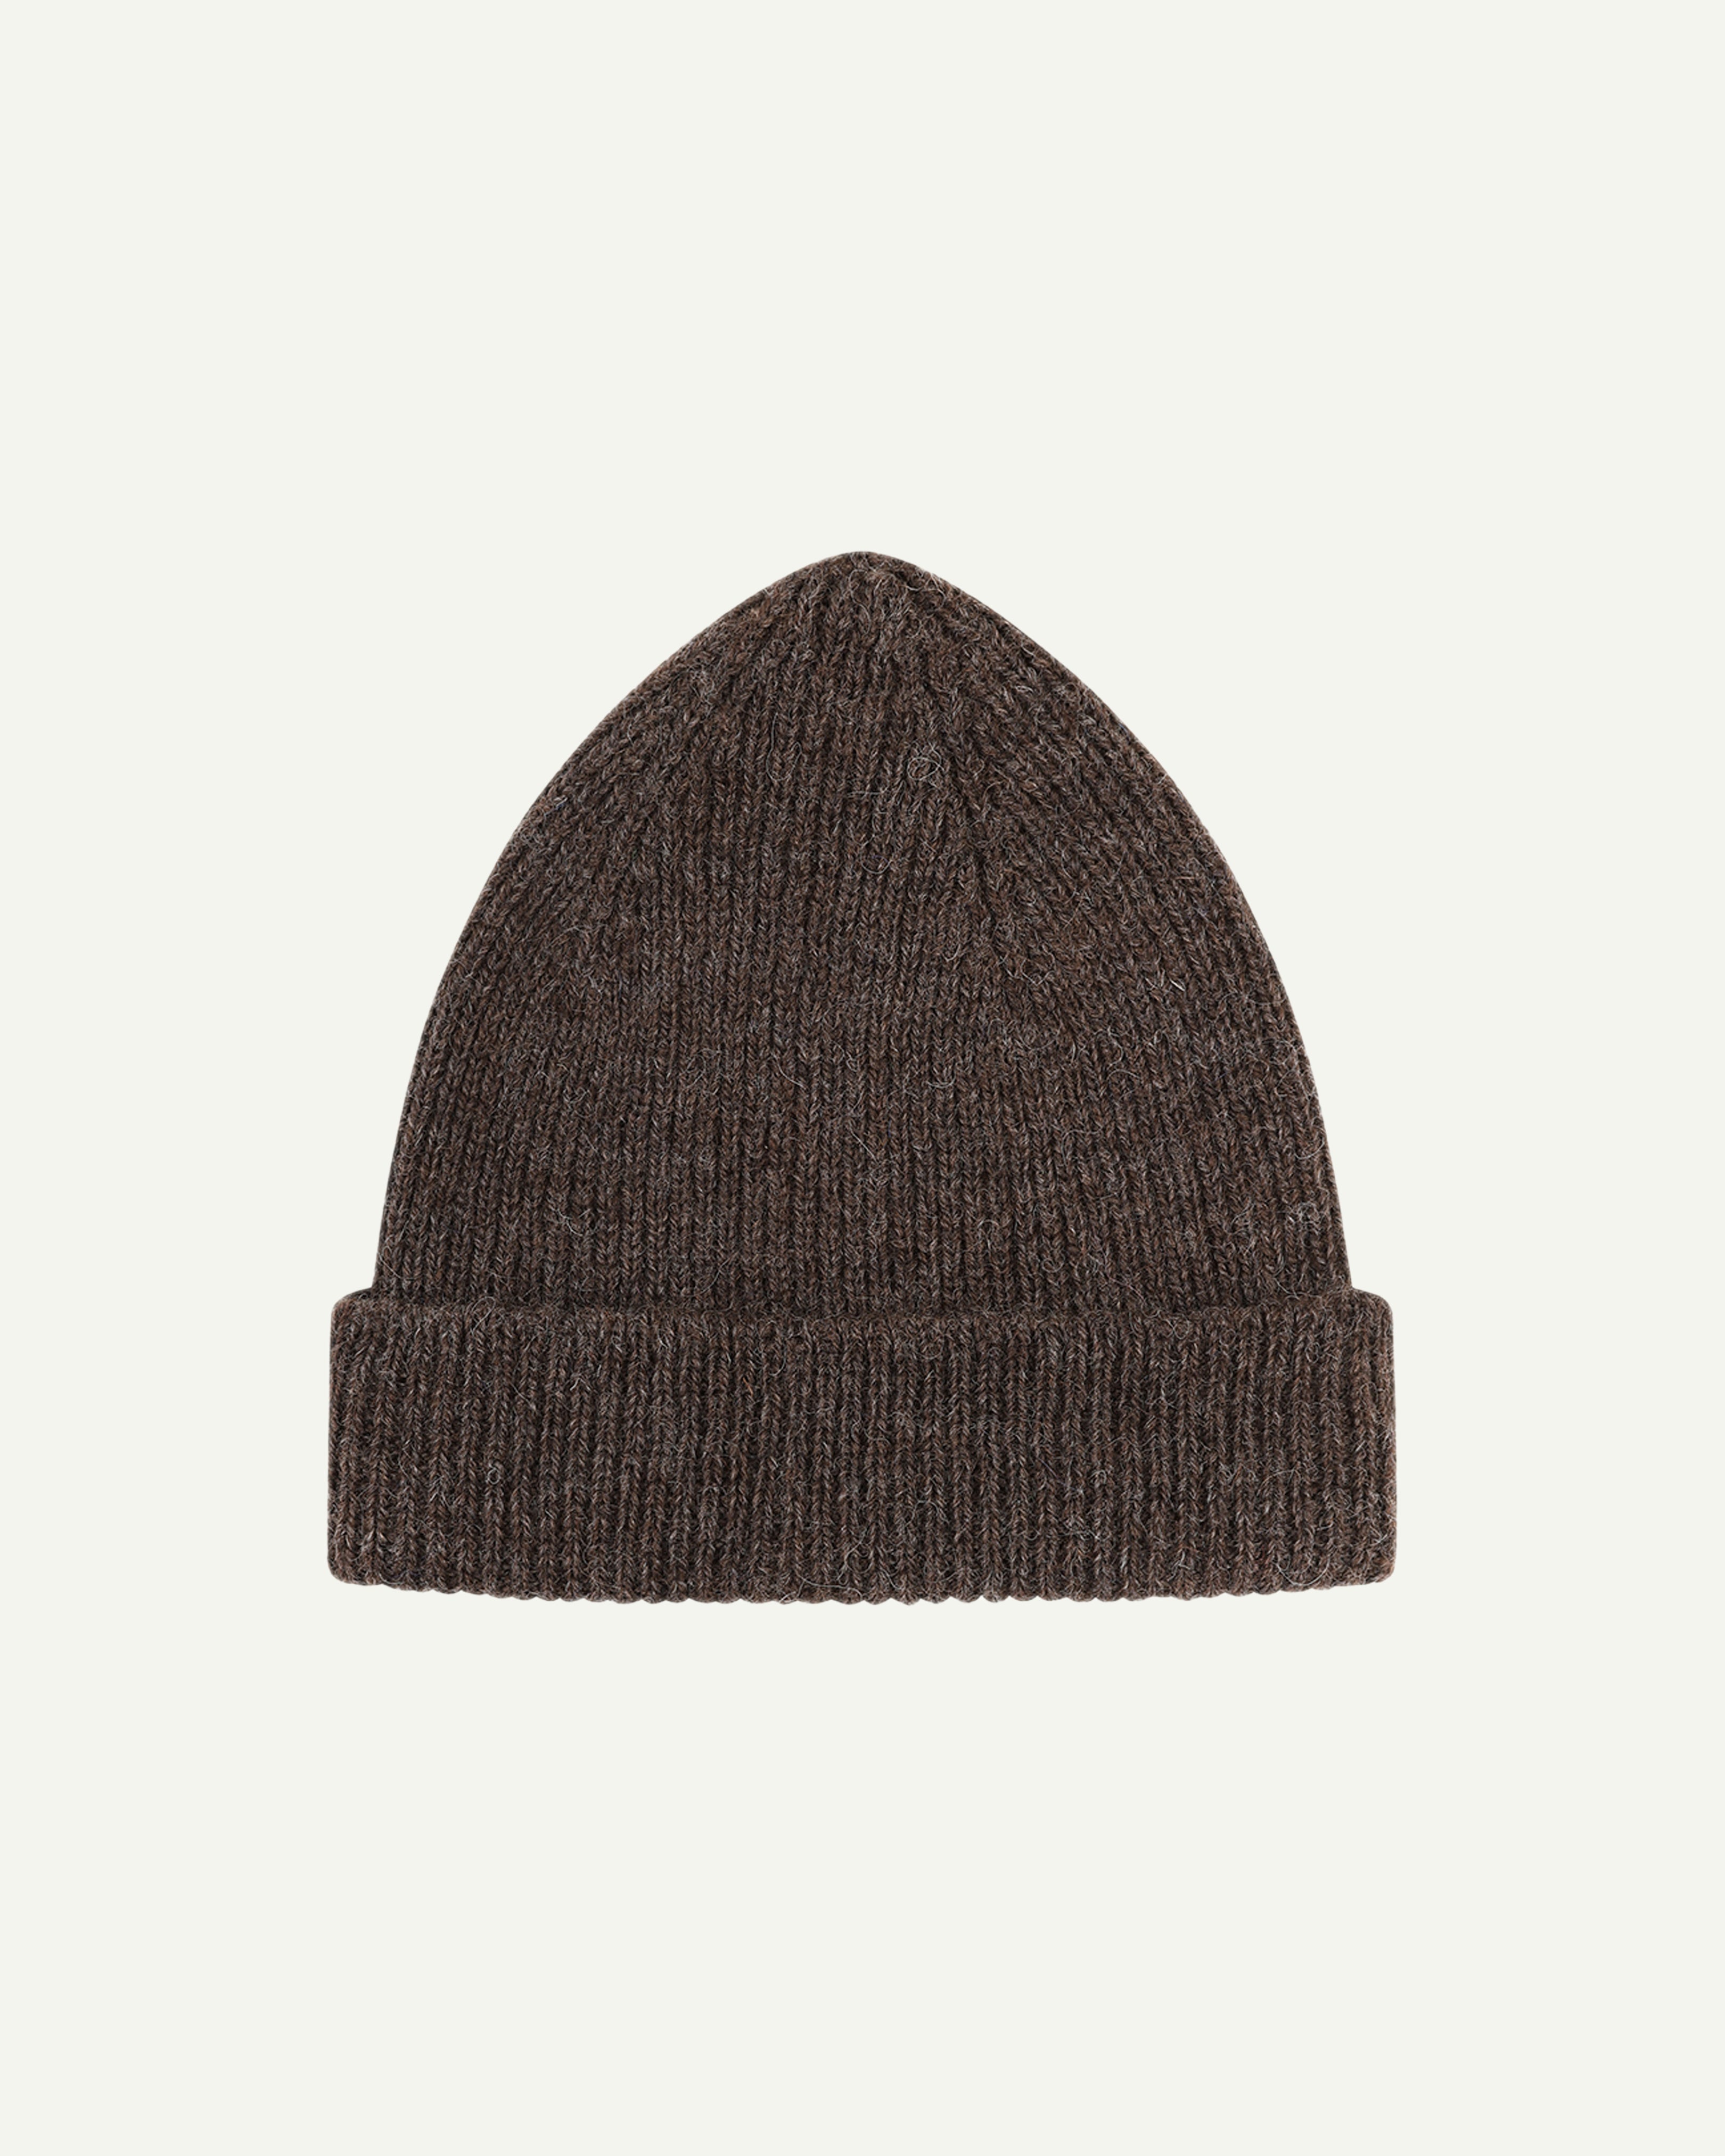 Flat view of Uskees 4005 undyed 'bran' soft brown coloured wool hat, with clear view of adjustable cuff.